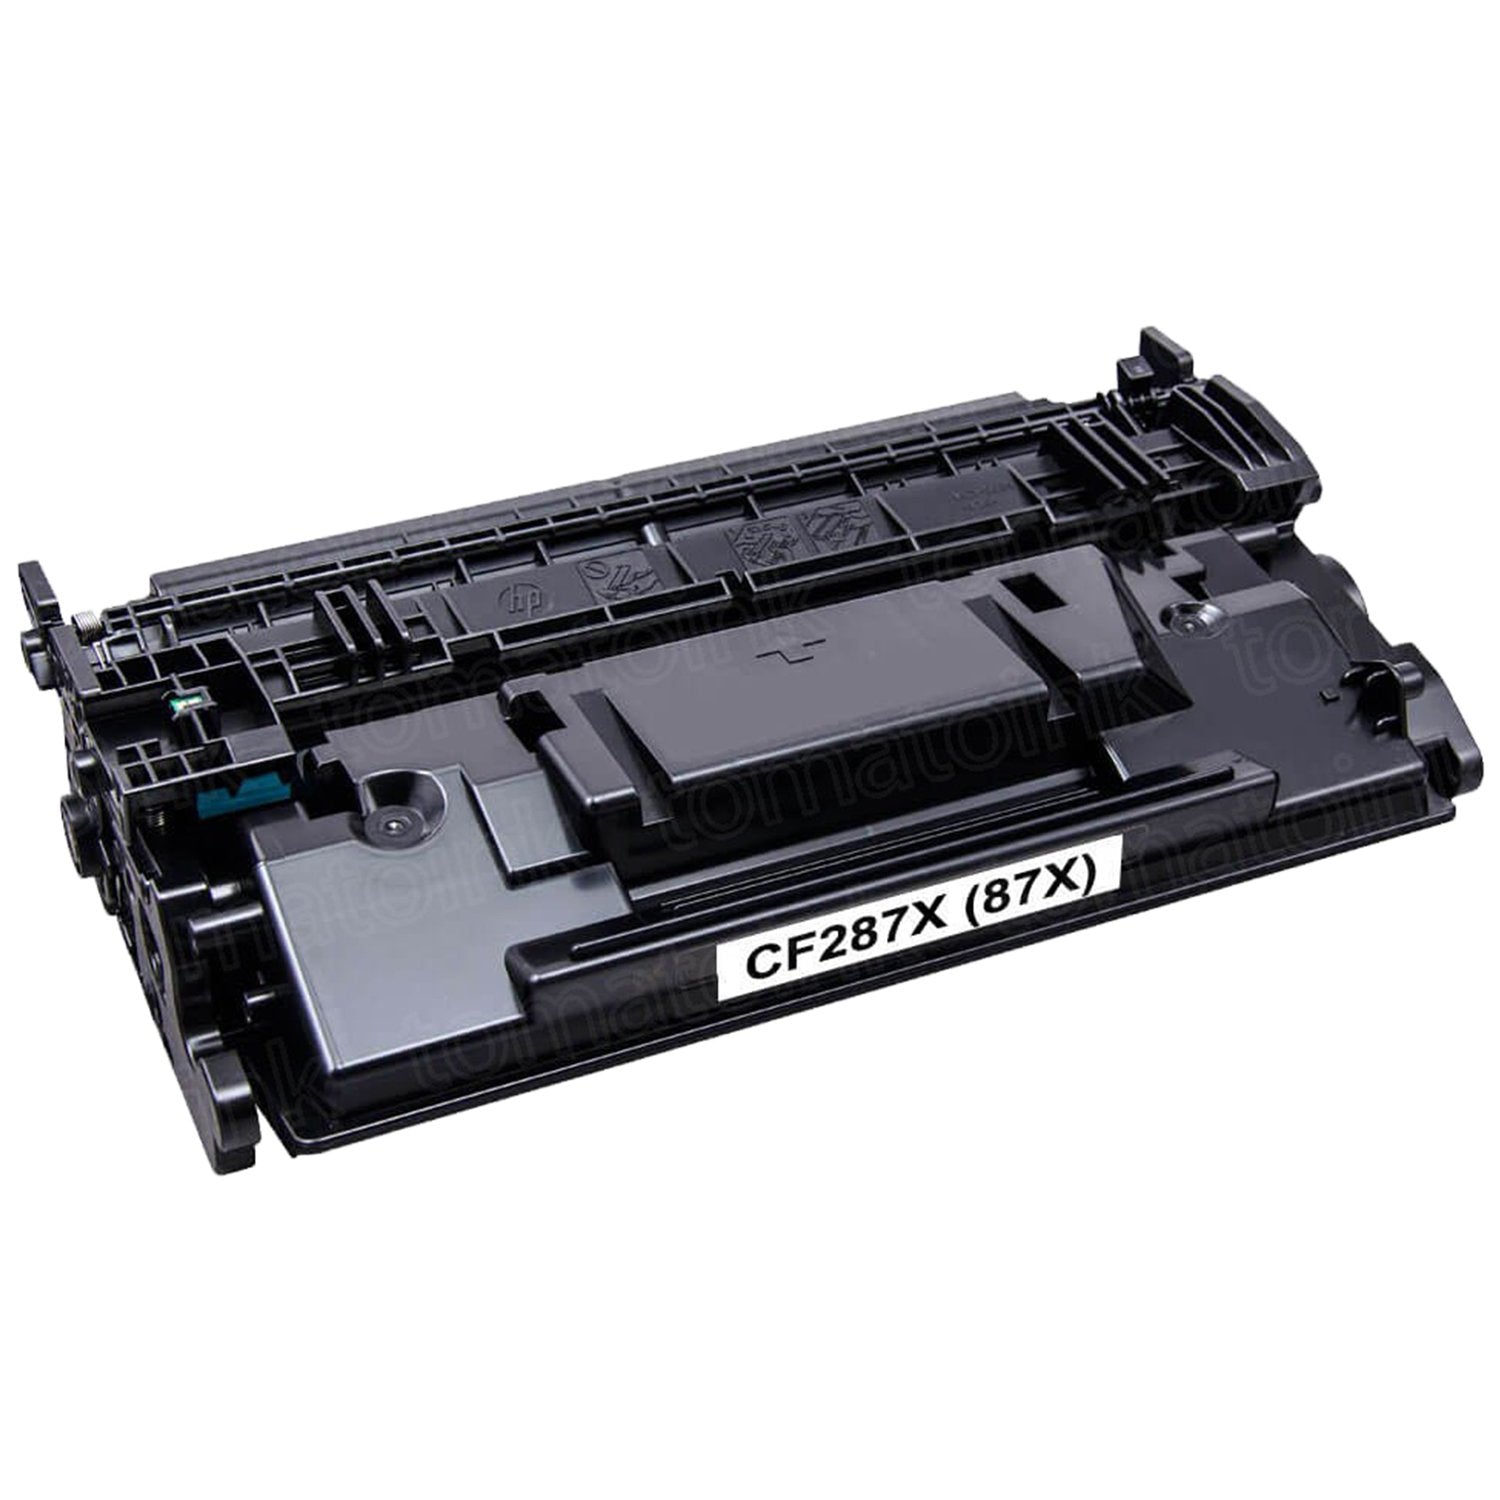 Absolute Toner Compatible CF287X HP 87X High Yield Black Toner Cartridge | Absolute Toner HP Toner Cartridges